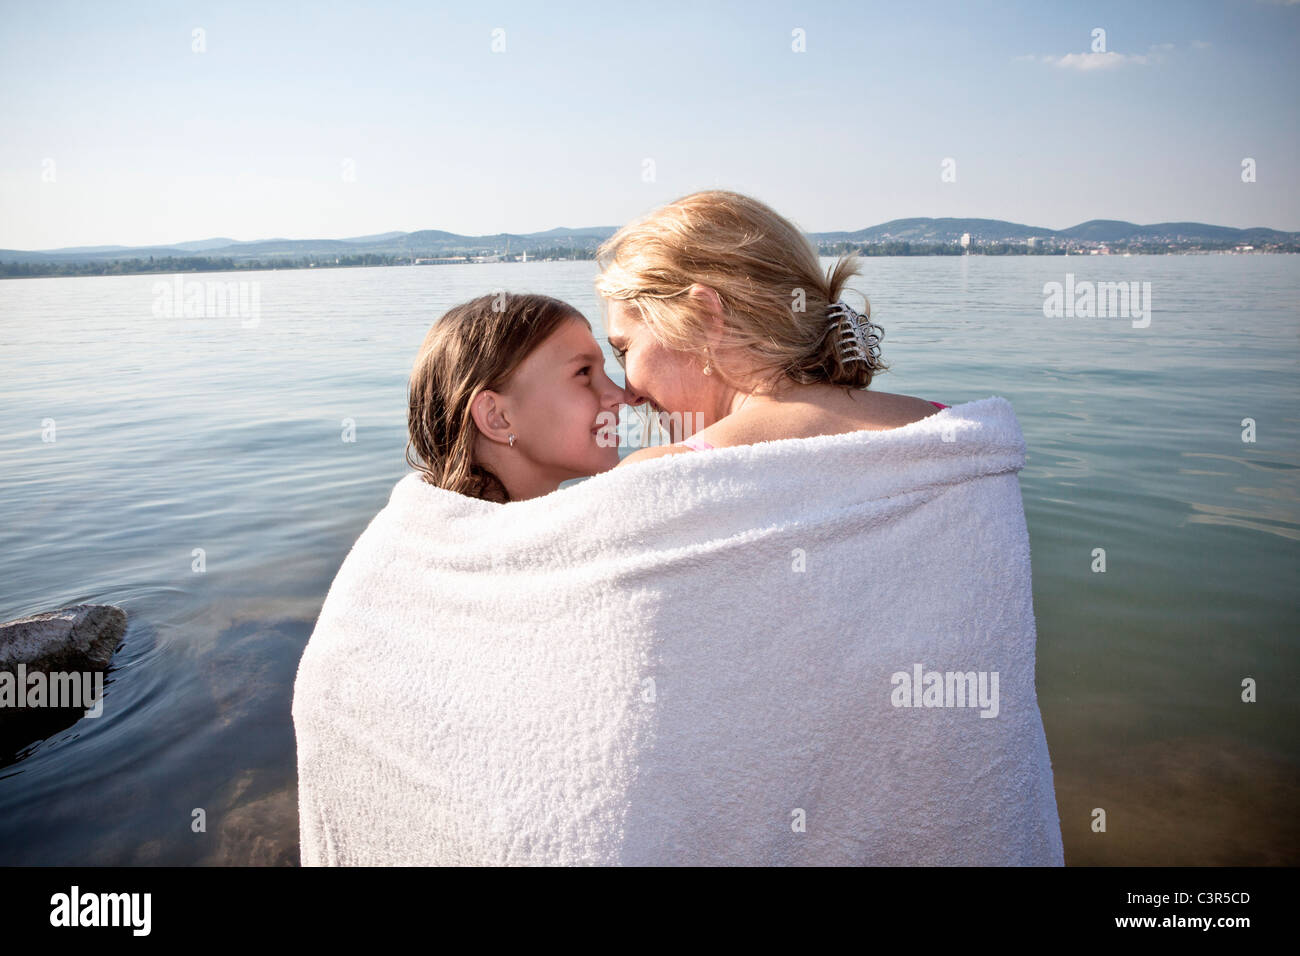 Mother and daughter wrapped in towel Stock Photo